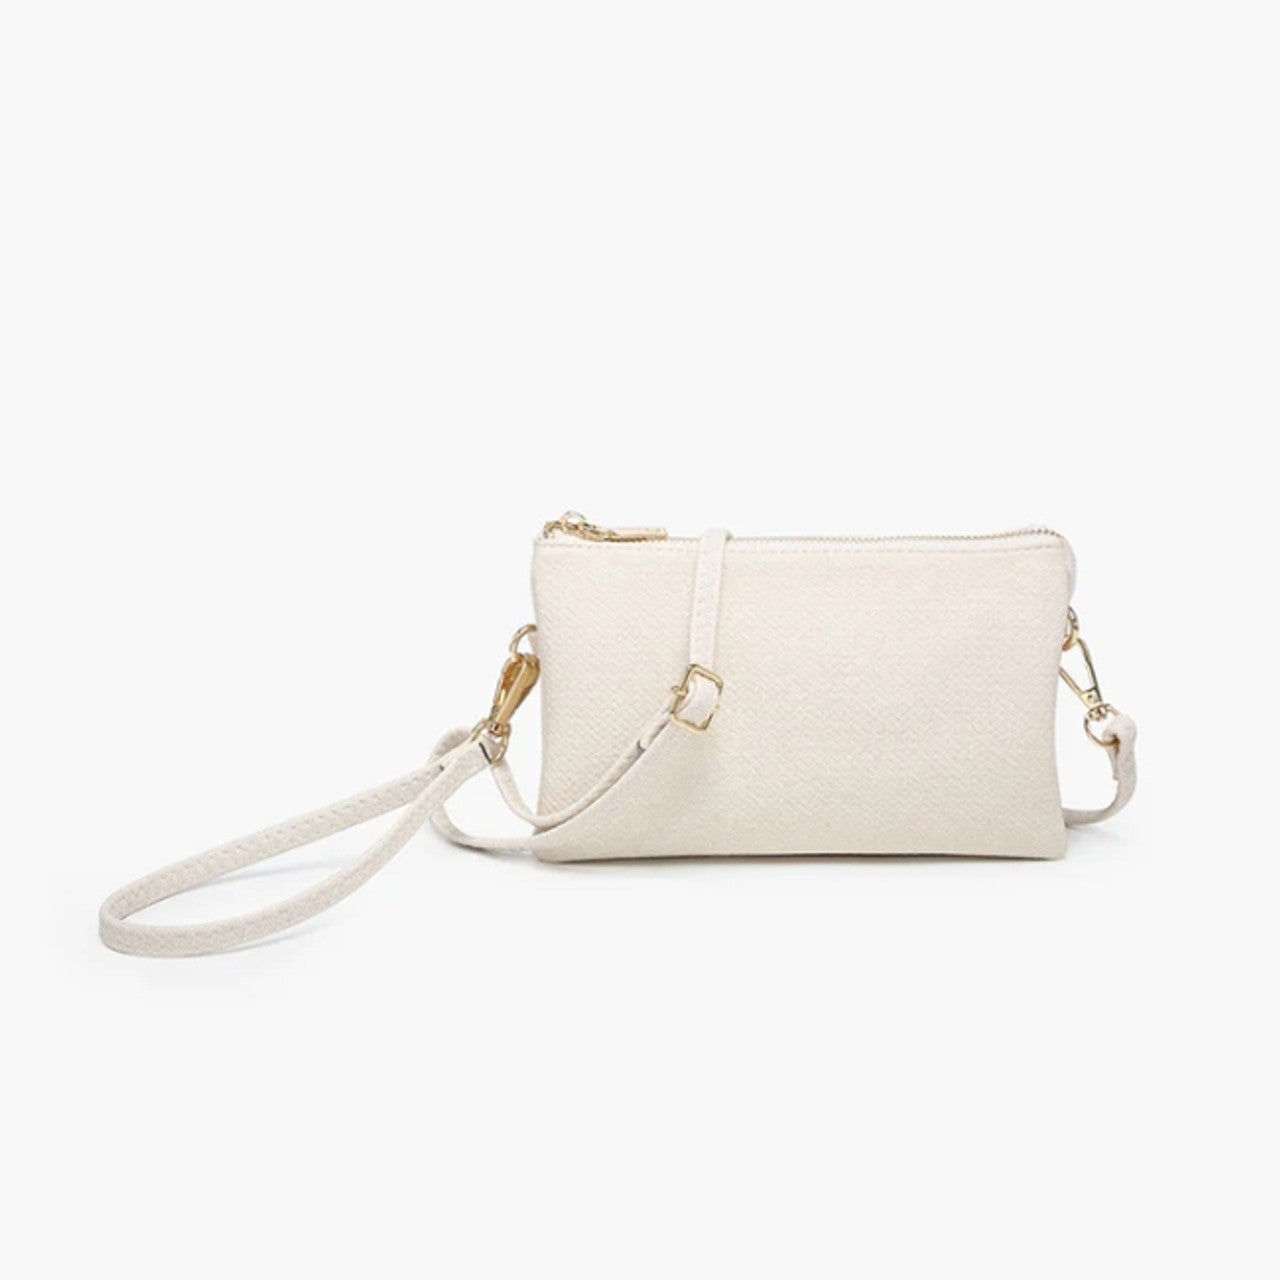 linen colored christine bag on a white background.